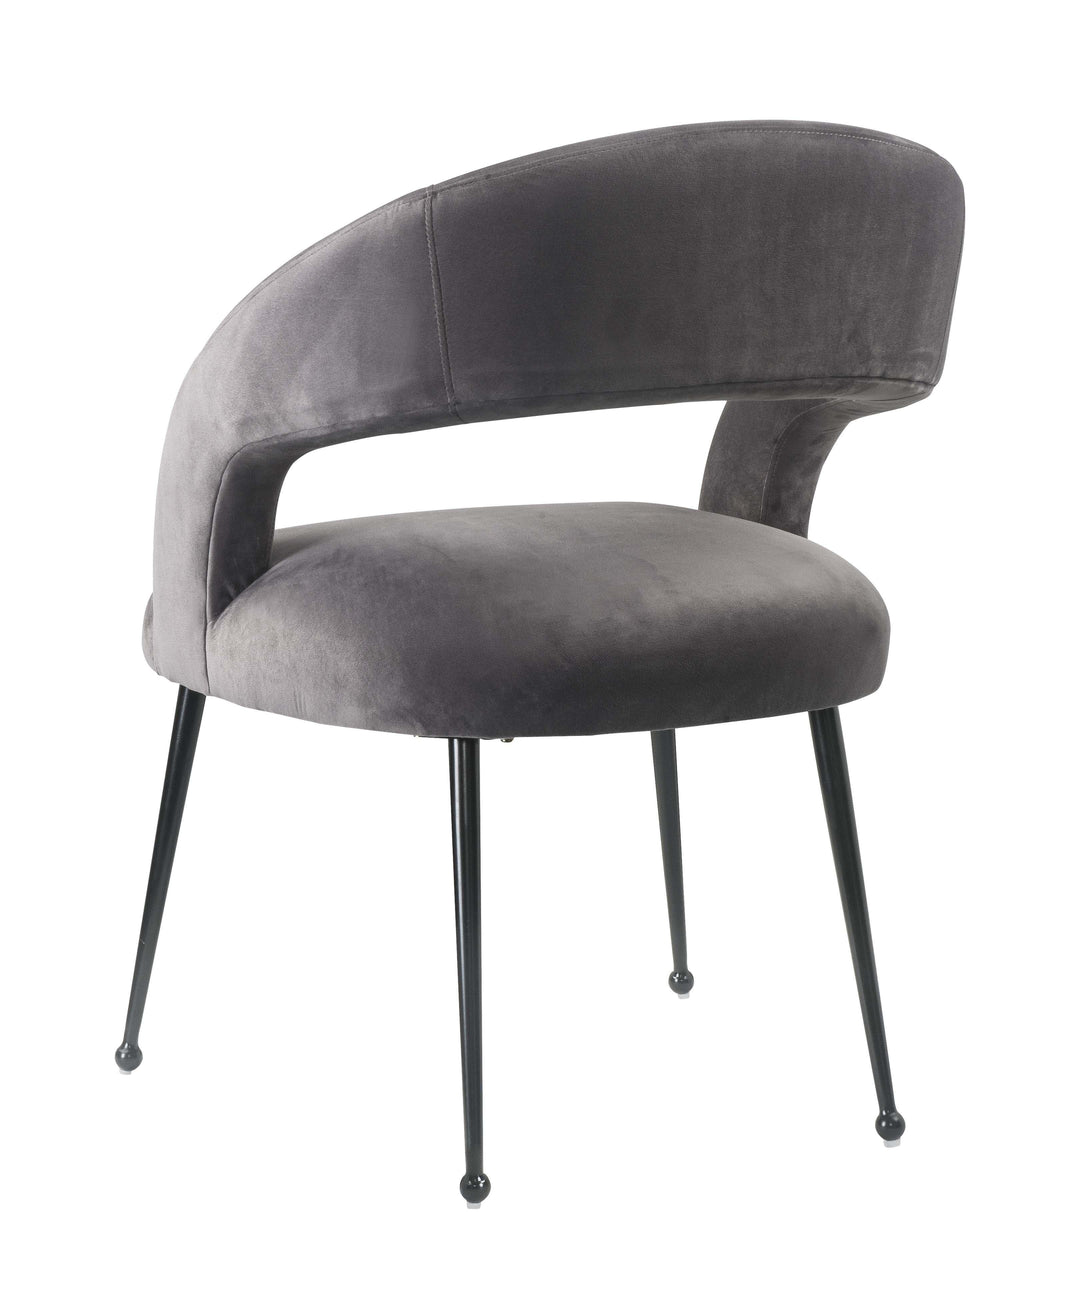 American Home Furniture | TOV Furniture - Rocco Grey Velvet Dining Chair